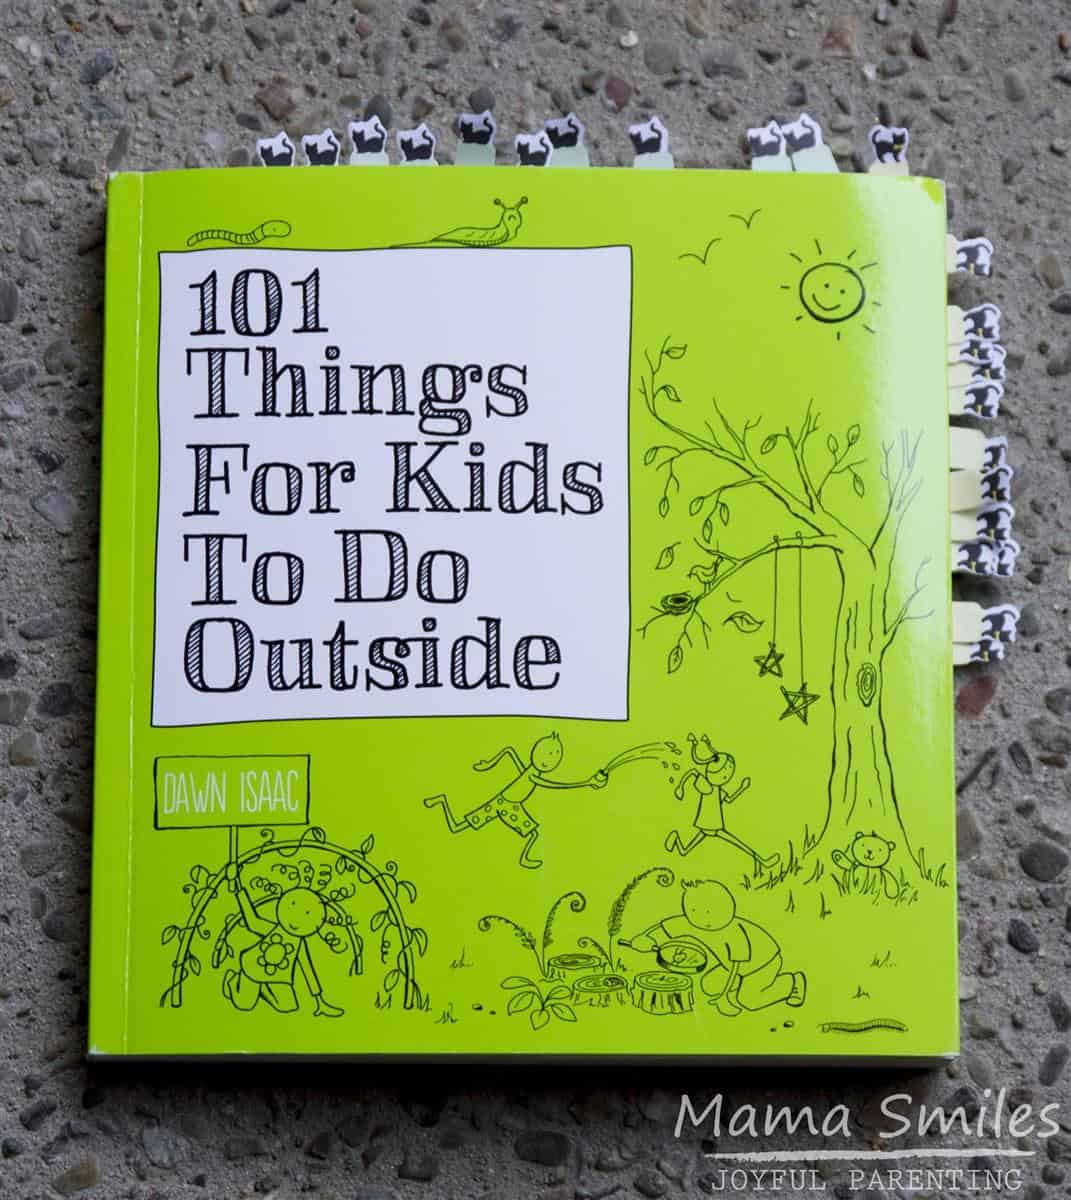 Looking for fun ways to get your kids learning, creating, and having fun outside? This is the book for you!